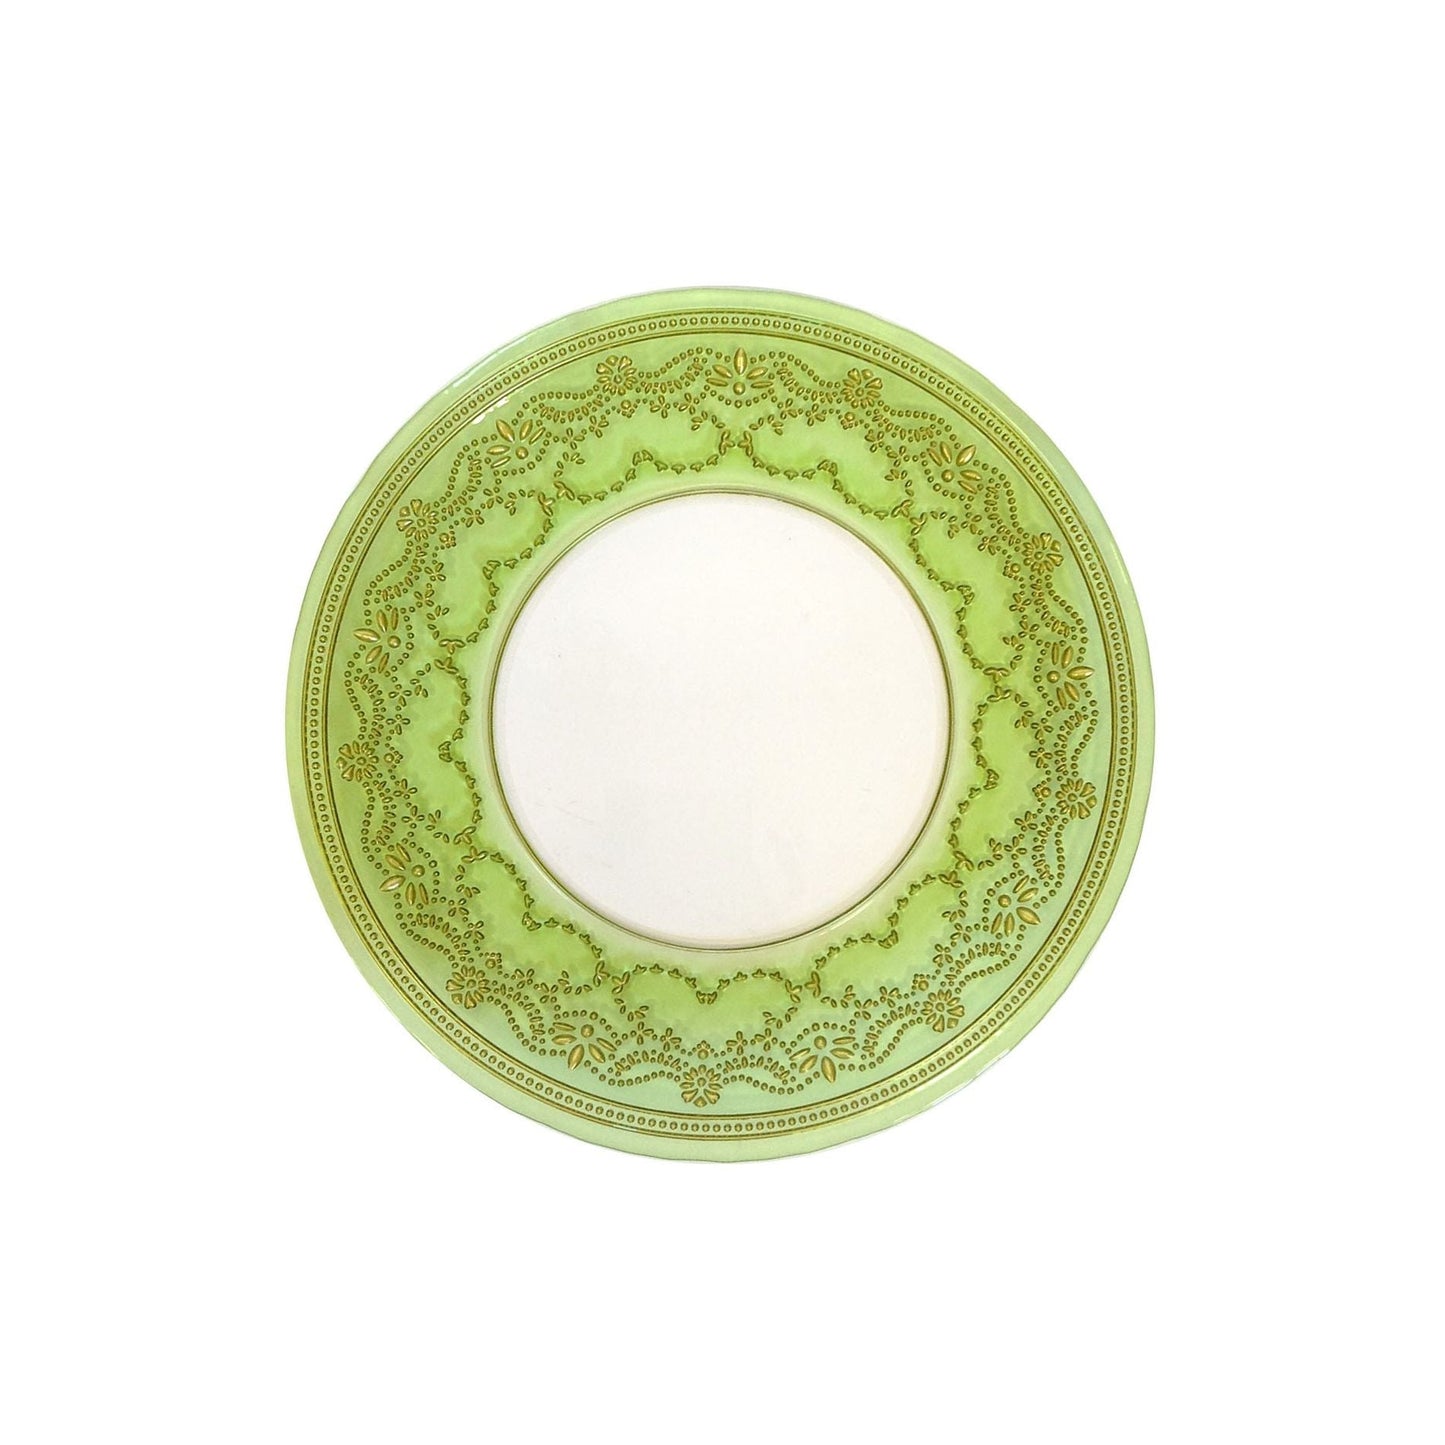 Classic Touch Decor Set 4 Chargers Green Border, Glass, 13"